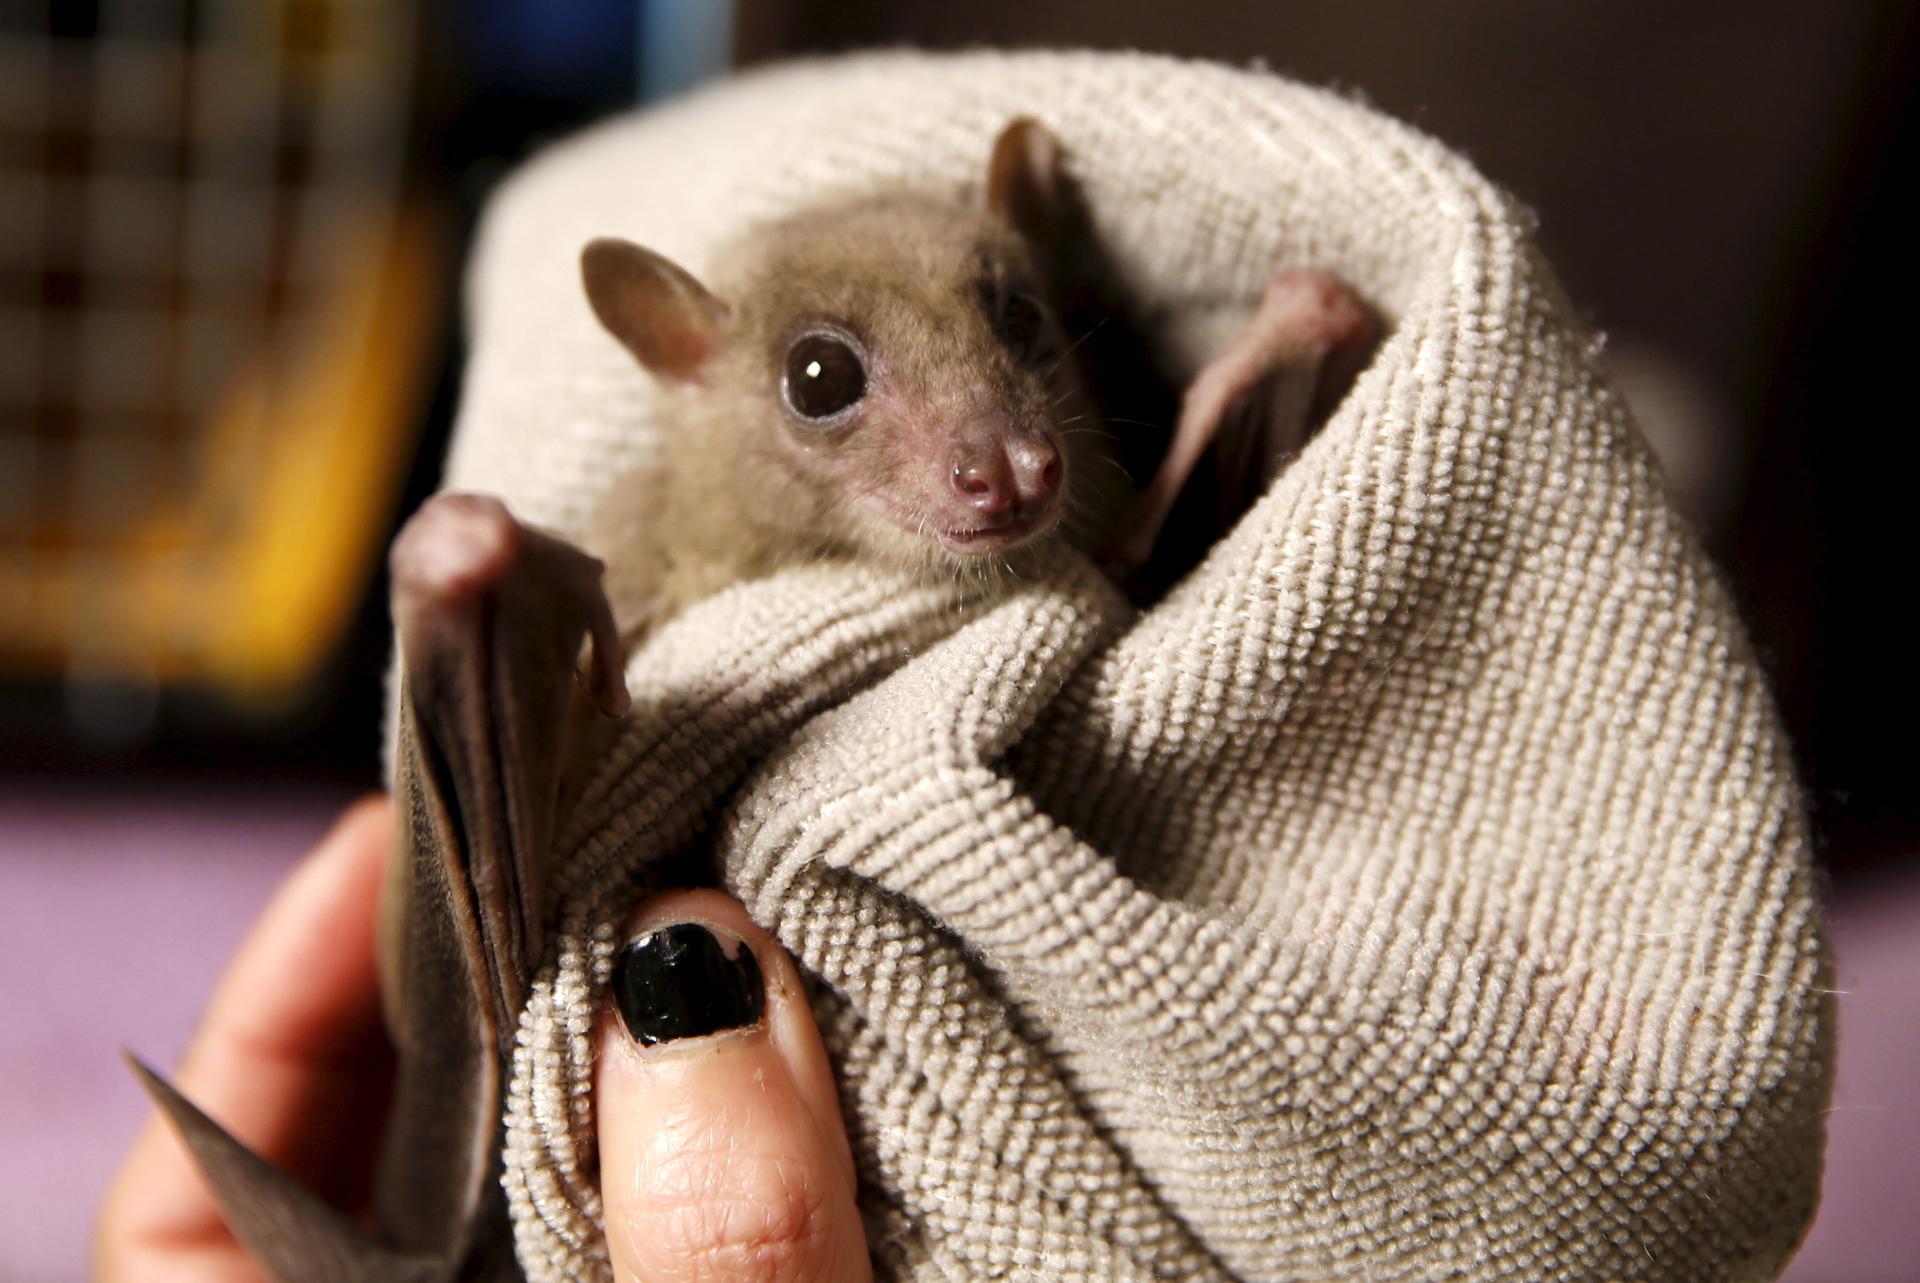 A woman holds an injured Egyptian fruit bat at her home in Tel Aviv February 21, 2016. 